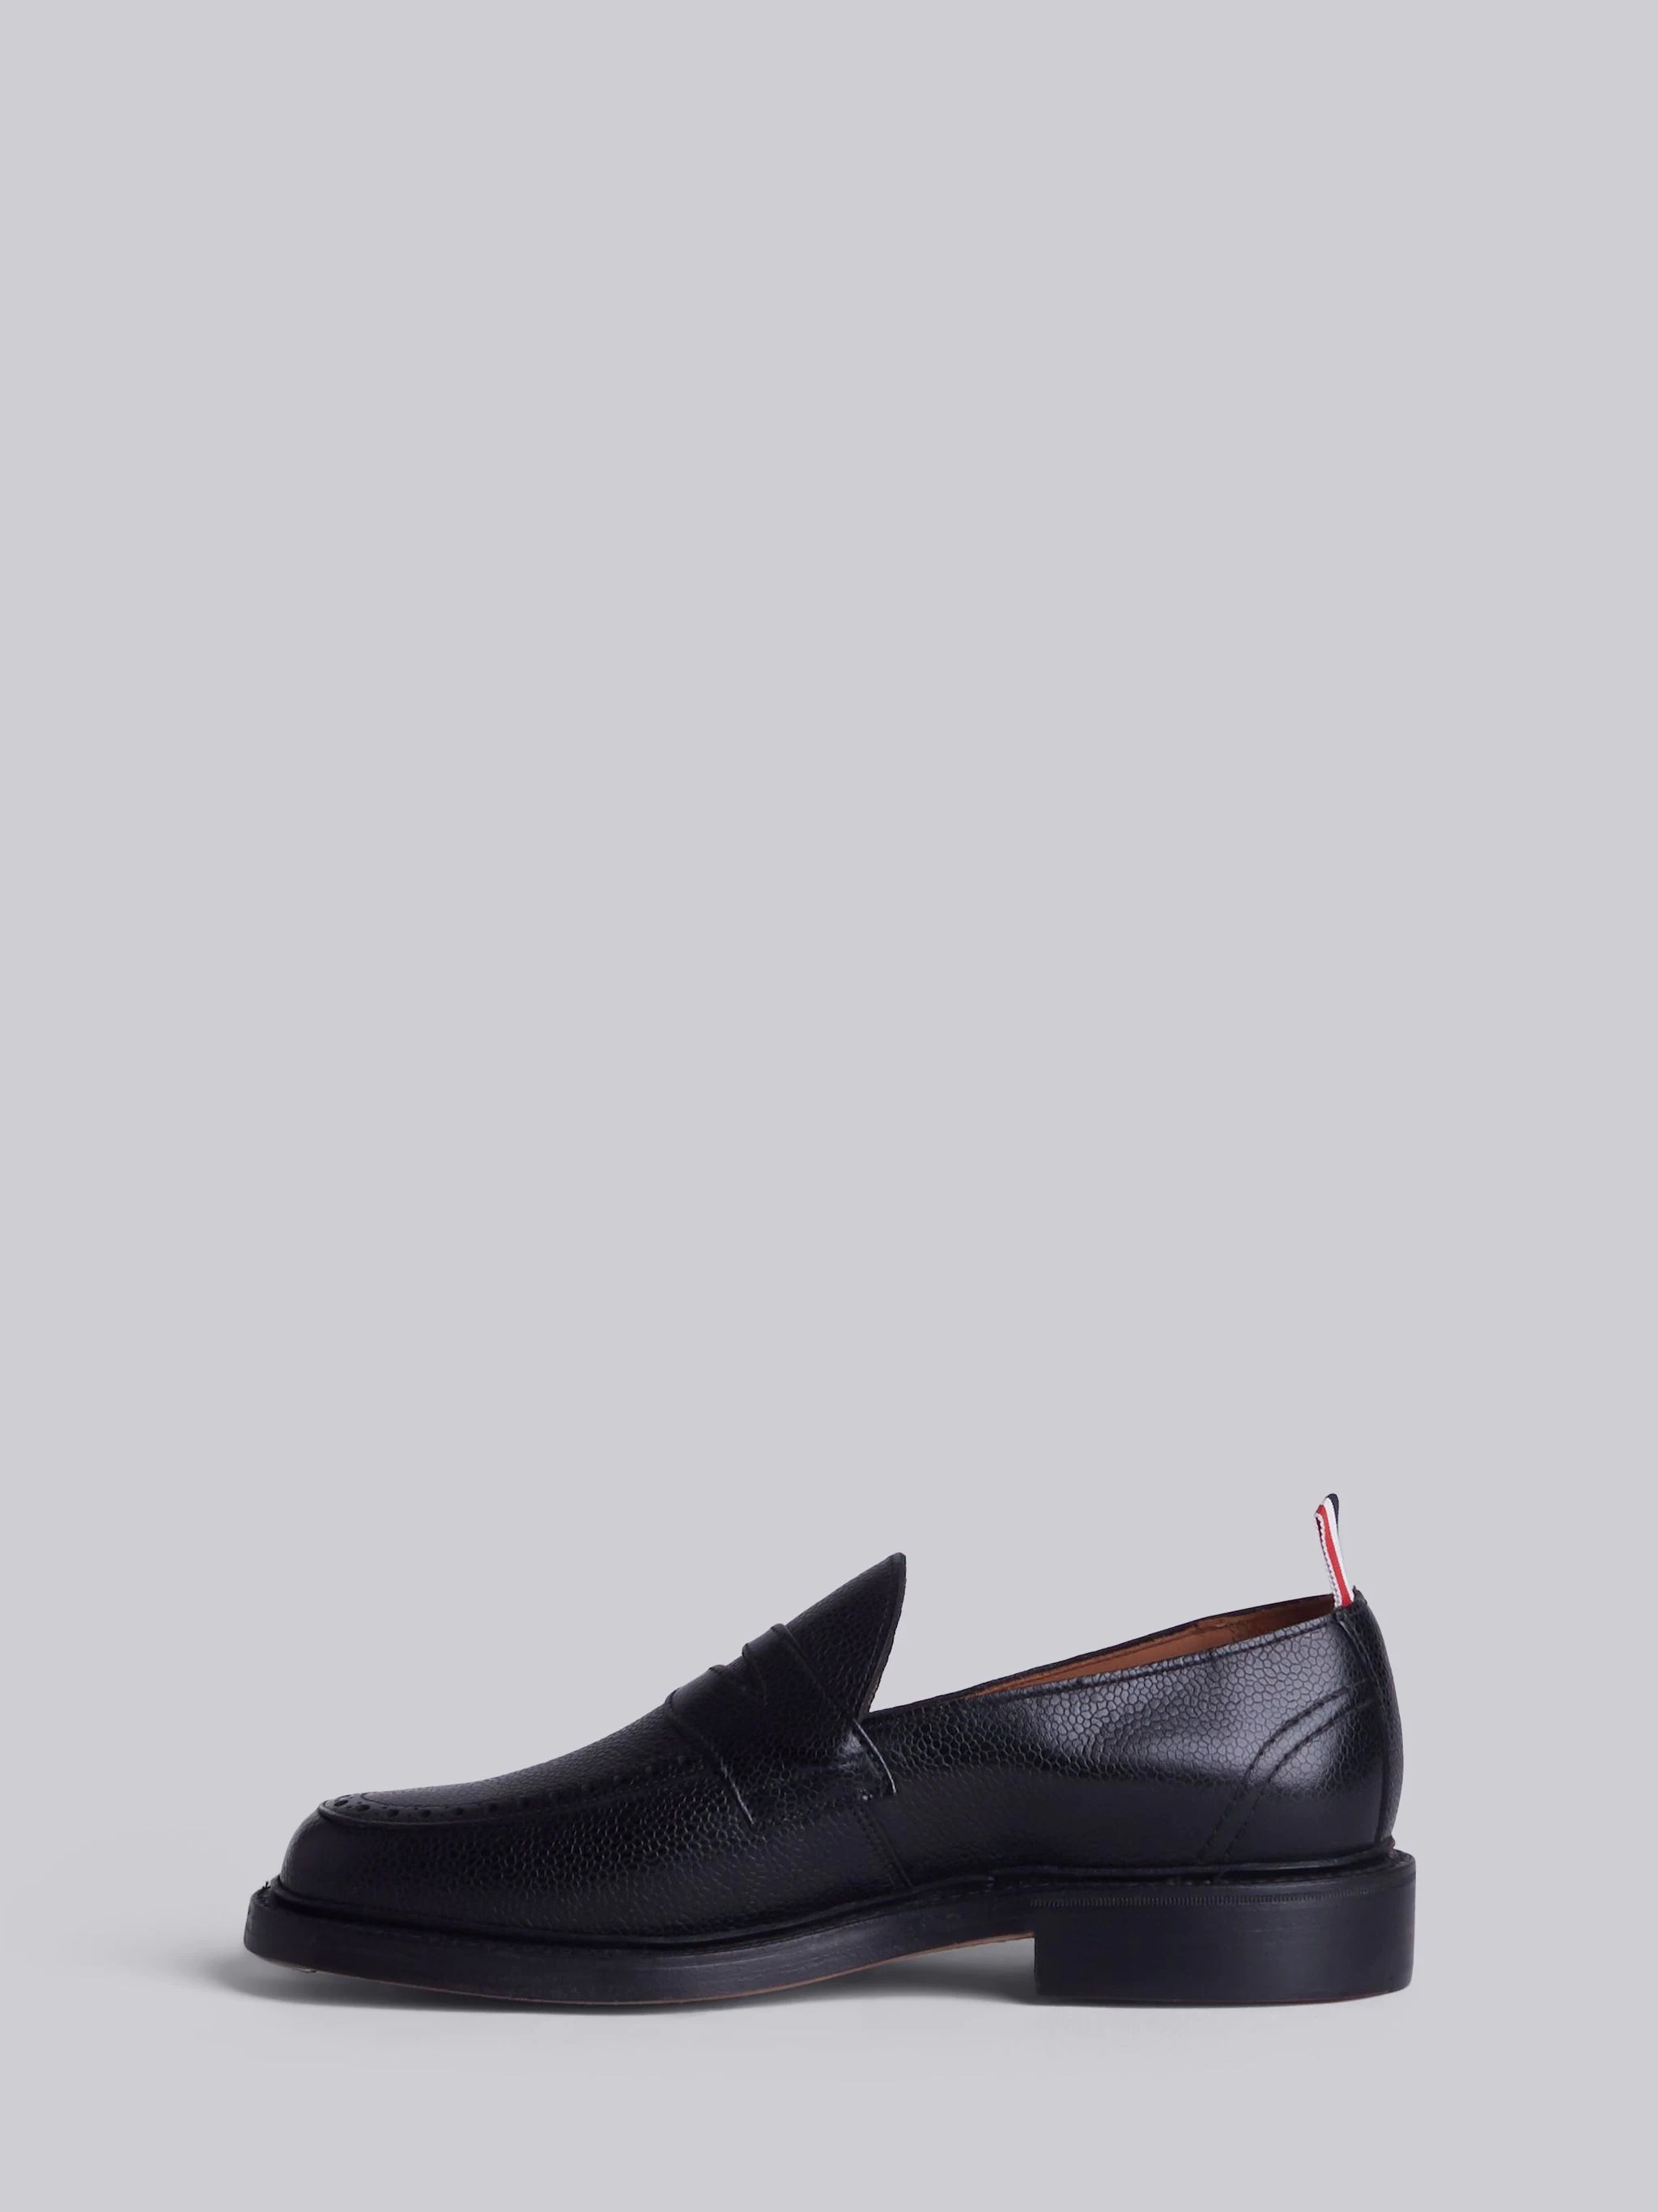 Penny Loafer With Leather Sole In Black Pebble Grain - 3